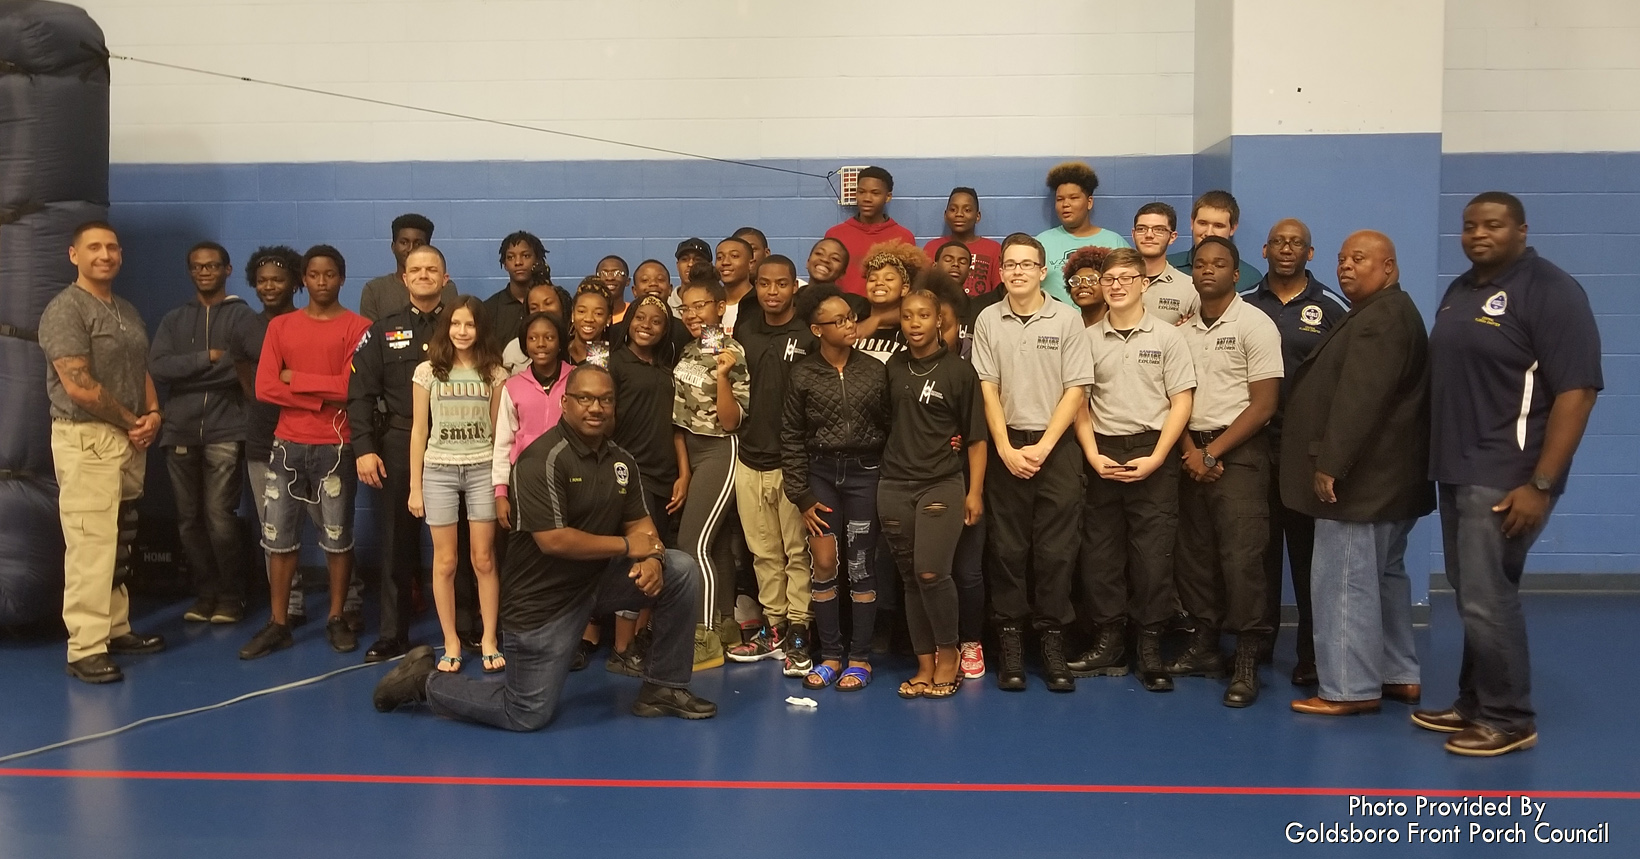 During the mentoring program, the members watched the movie “The Hate You Give.” After the movie, all the members participated in a discussion with Law Enforcement to close the gap between them and the community.